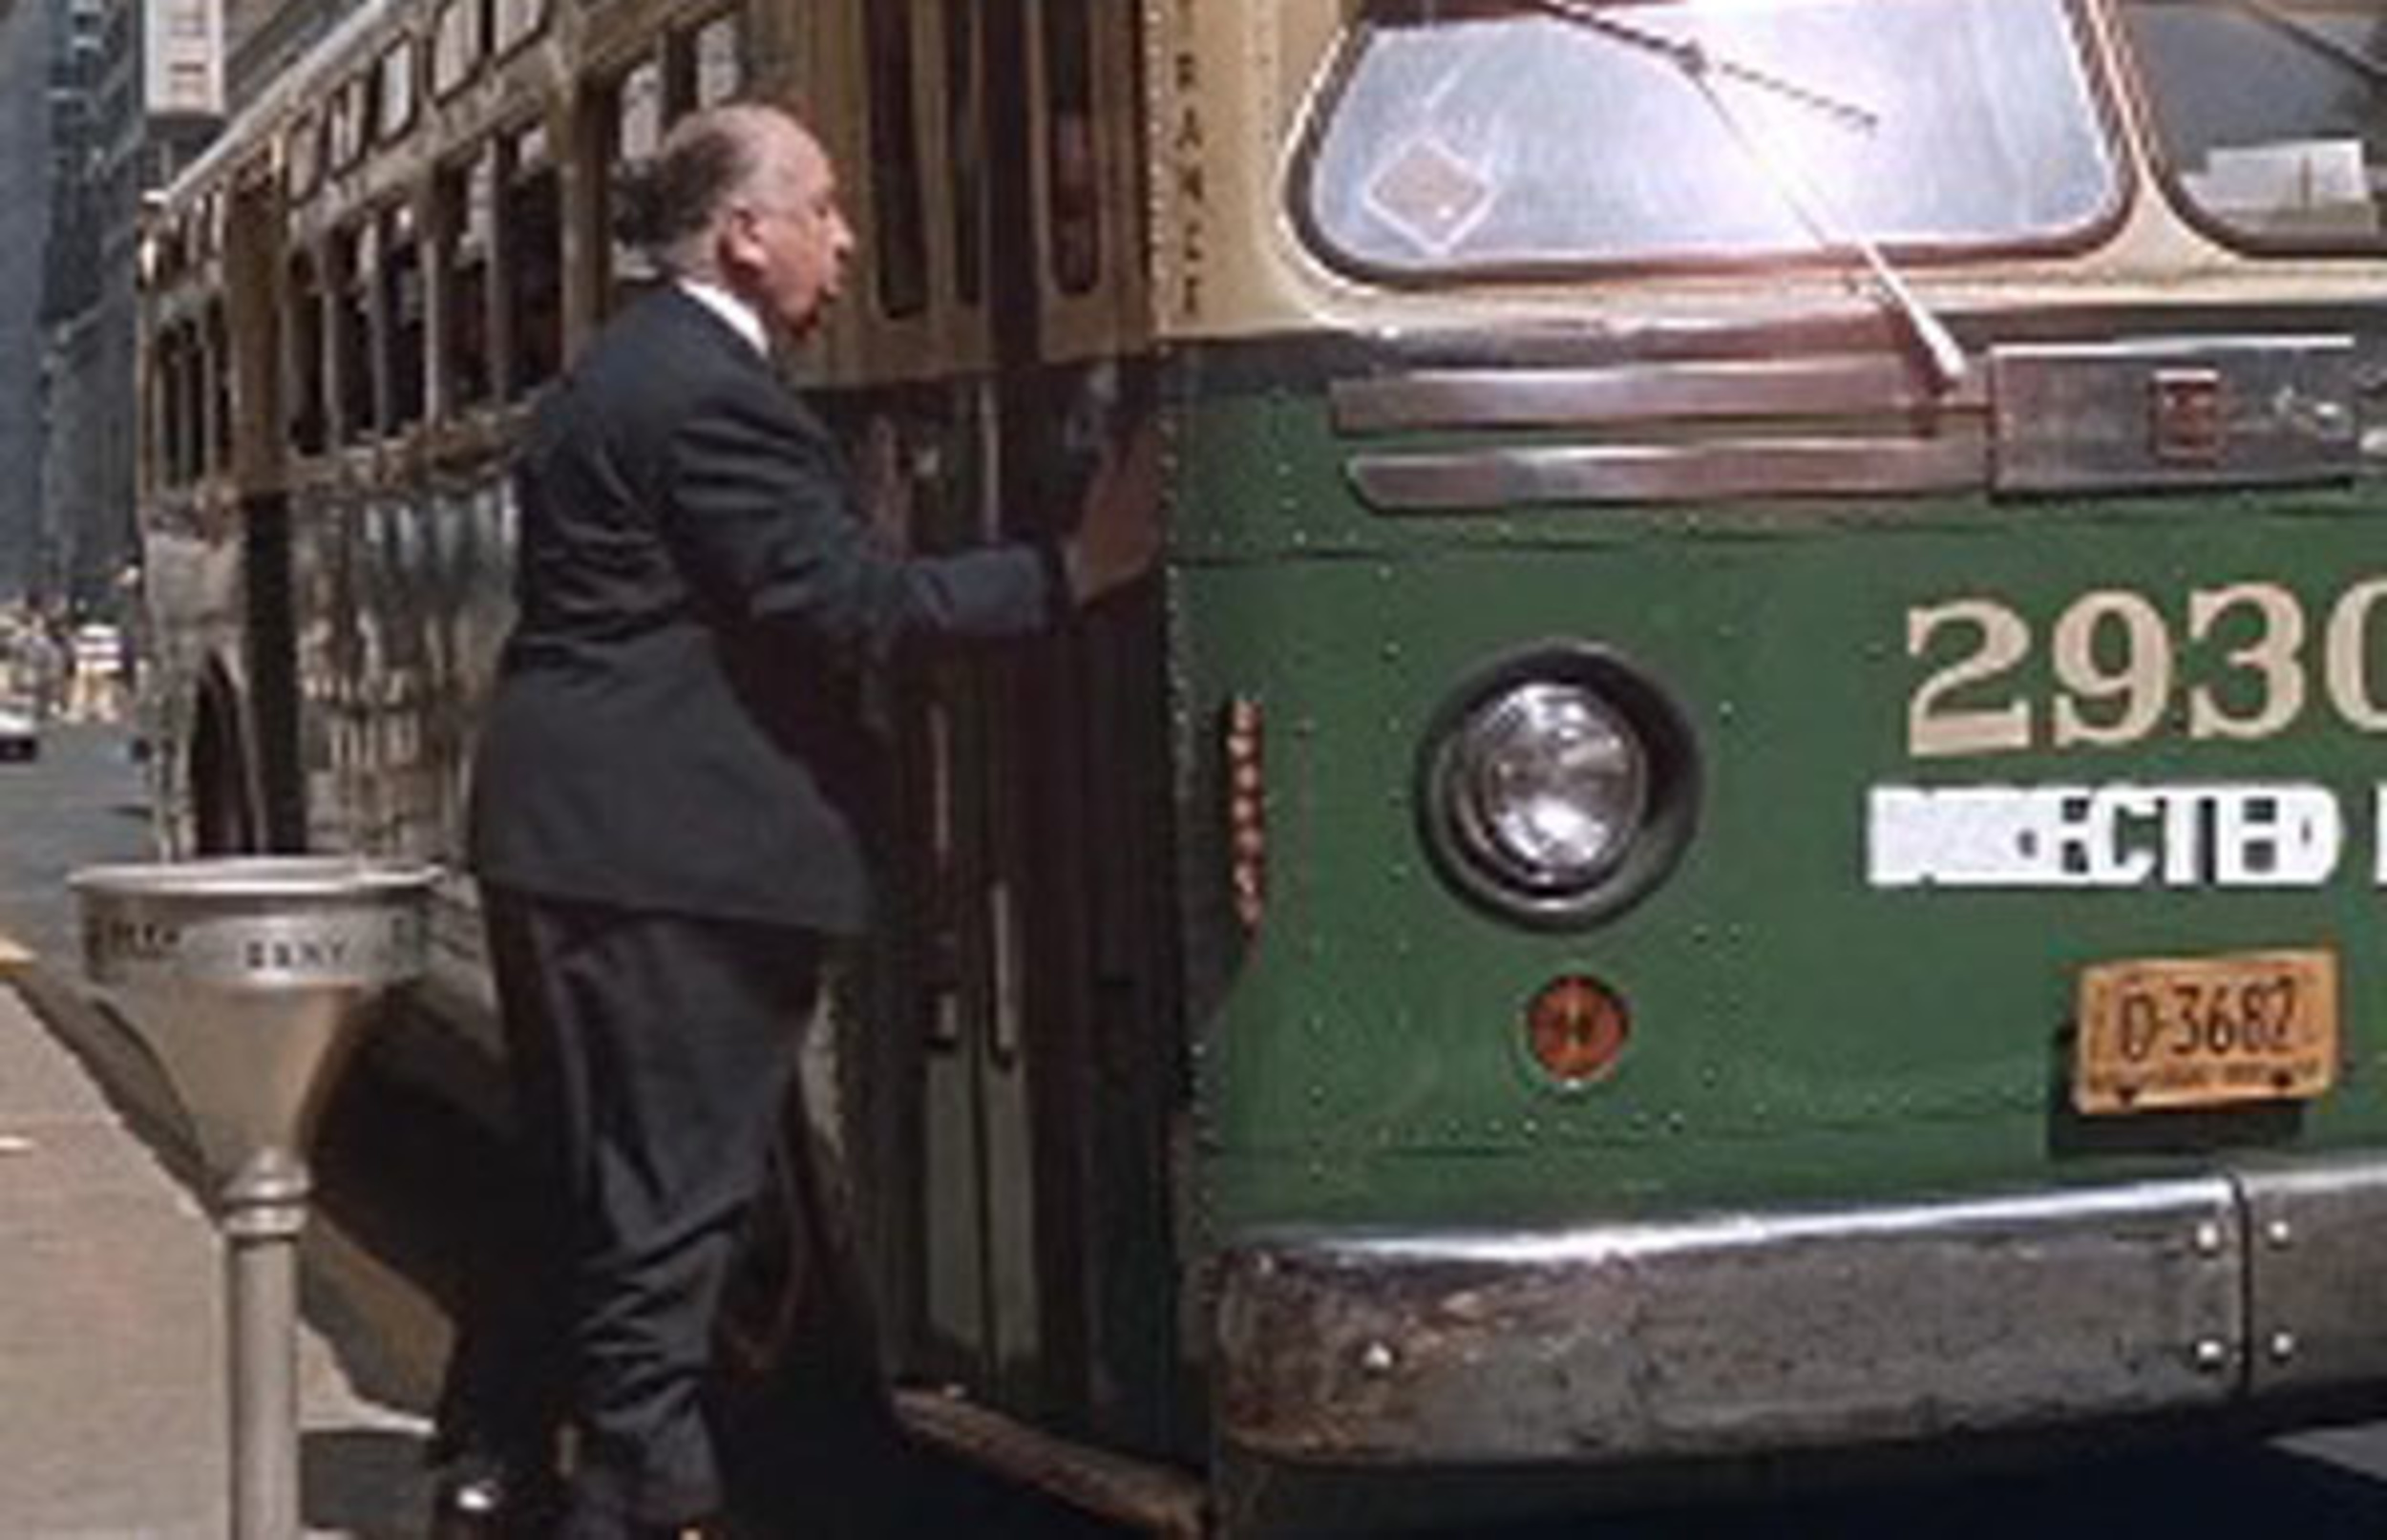 <p>Hitch doesn’t have much luck with public transit. Right at the end of the opening credits, Hitchcock fails to get on board a New York City bus. It closes its doors in his face and he’s left to wait for the next bus, we assume. Better luck next time, Hitch!</p>